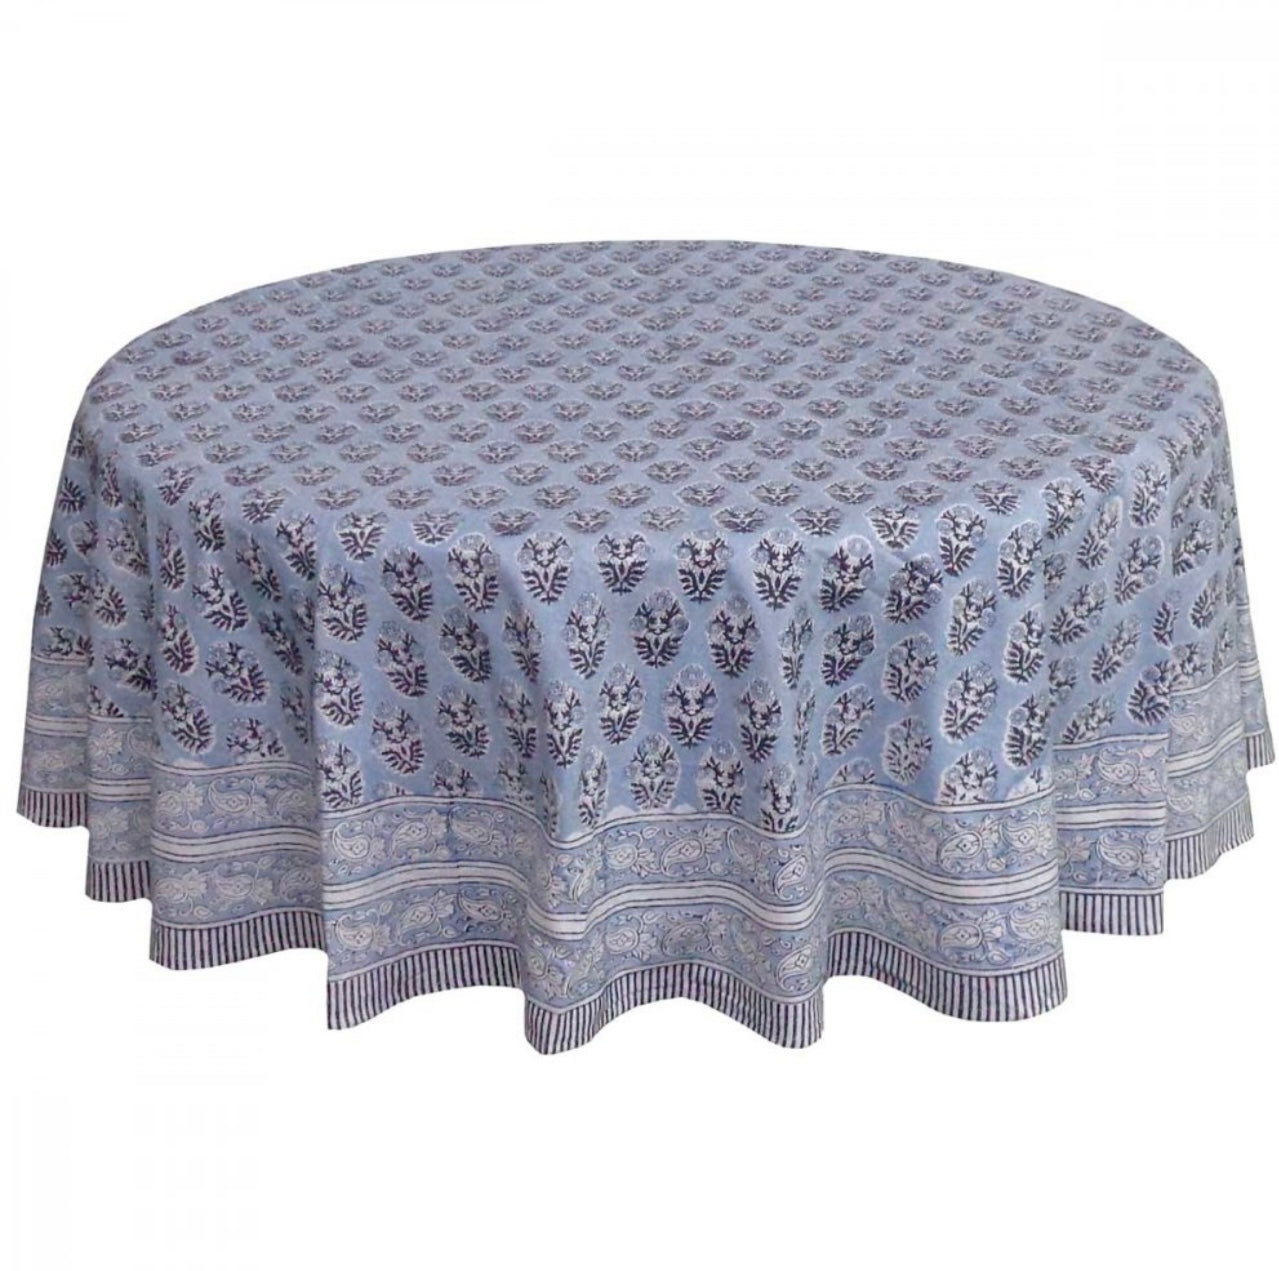 Sky Blue Brindisi Tablecloth